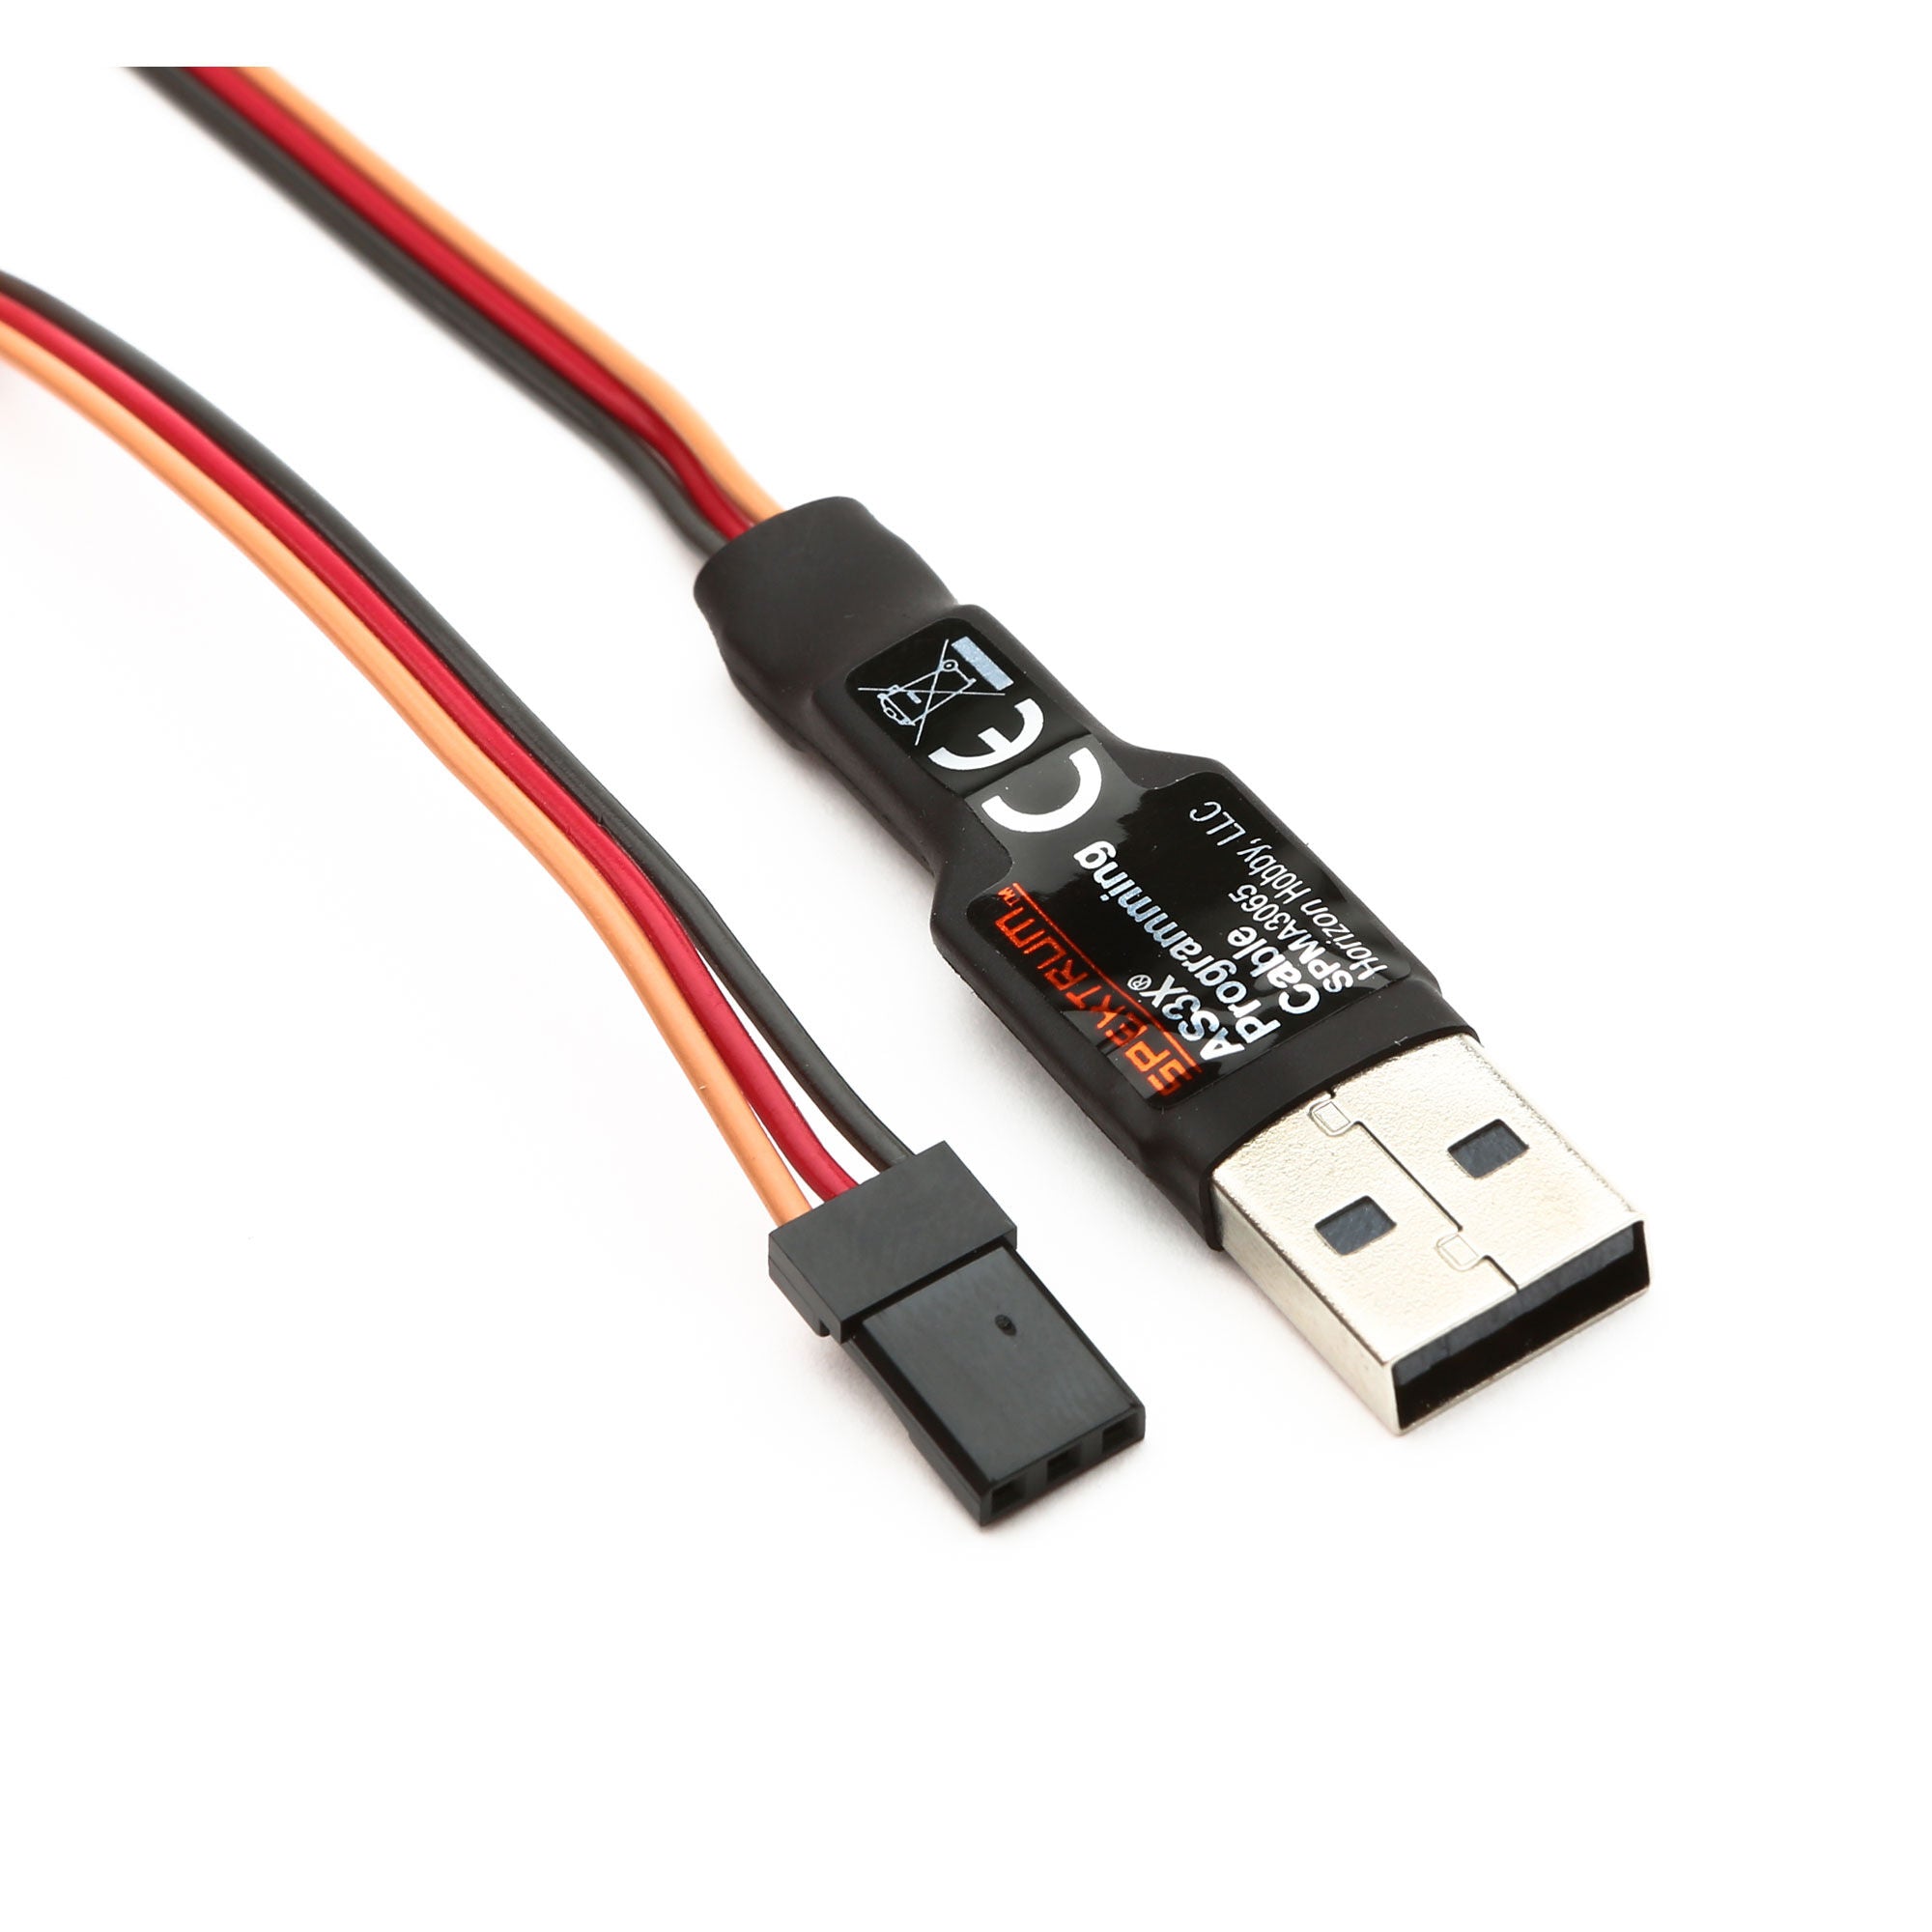 SPMA3065 Transmitter/Receiver Programming Cable: USB Interface